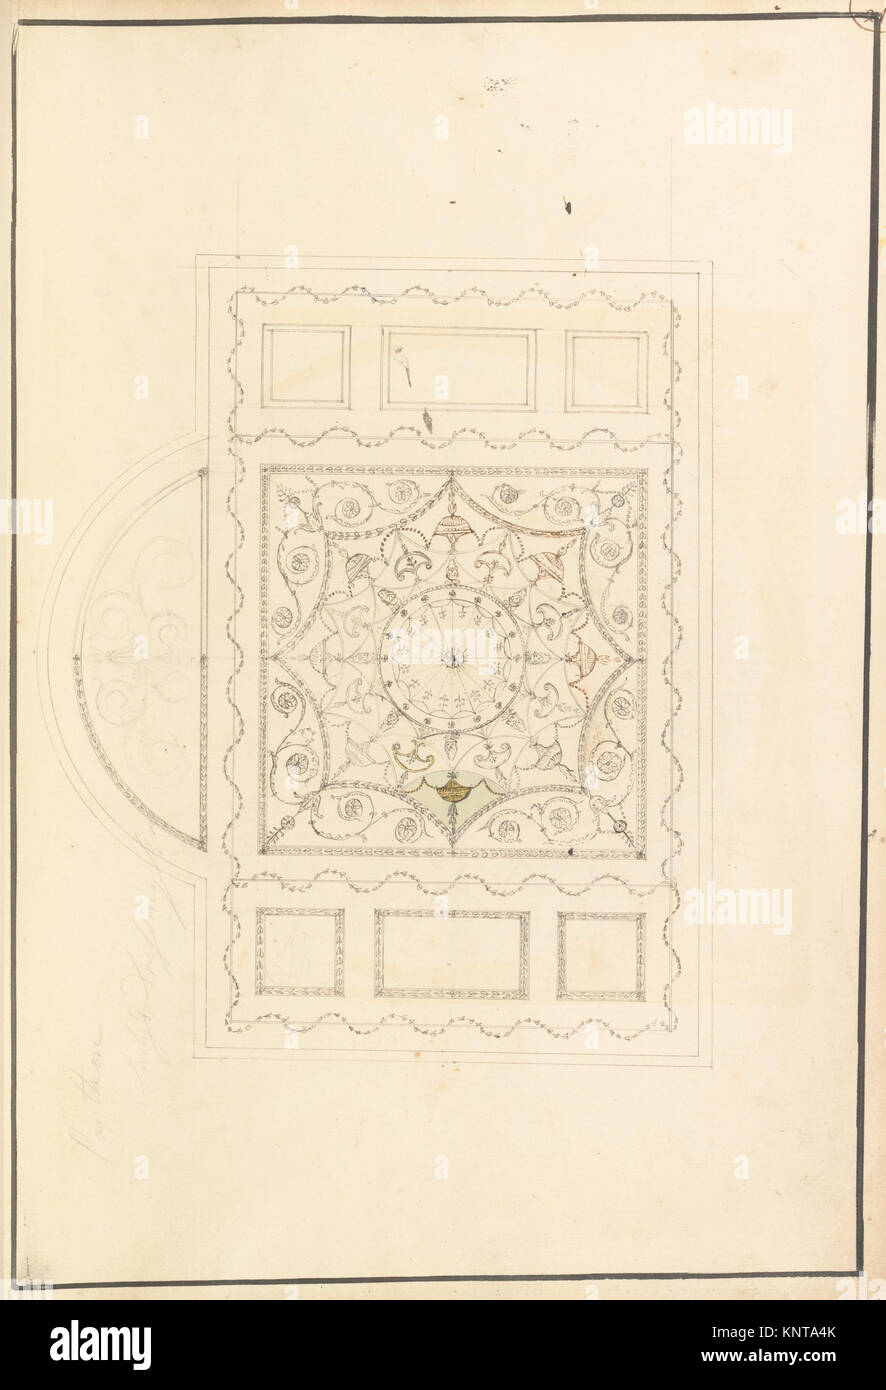 Drawings for Ceilings and Wall Elevations MET DP145432 383586 Artist: James Wyatt, British, Weeford, Stafforshire 1746?1813 near Marlborough, Wiltshire, Design for Ceiling of Ladies' Dressing Room at the Pantheon, Oxford Street, London, ca. 1770, Ink and watercolor over graphite, sheet: 20 1/4 x 14 3/16 in. (51.5 x 36 cm). The Metropolitan Museum of Art, New York. The Elisha Whittelsey Collection, The Elisha Whittelsey Fund, 1958 (58.511(20)) Stock Photo